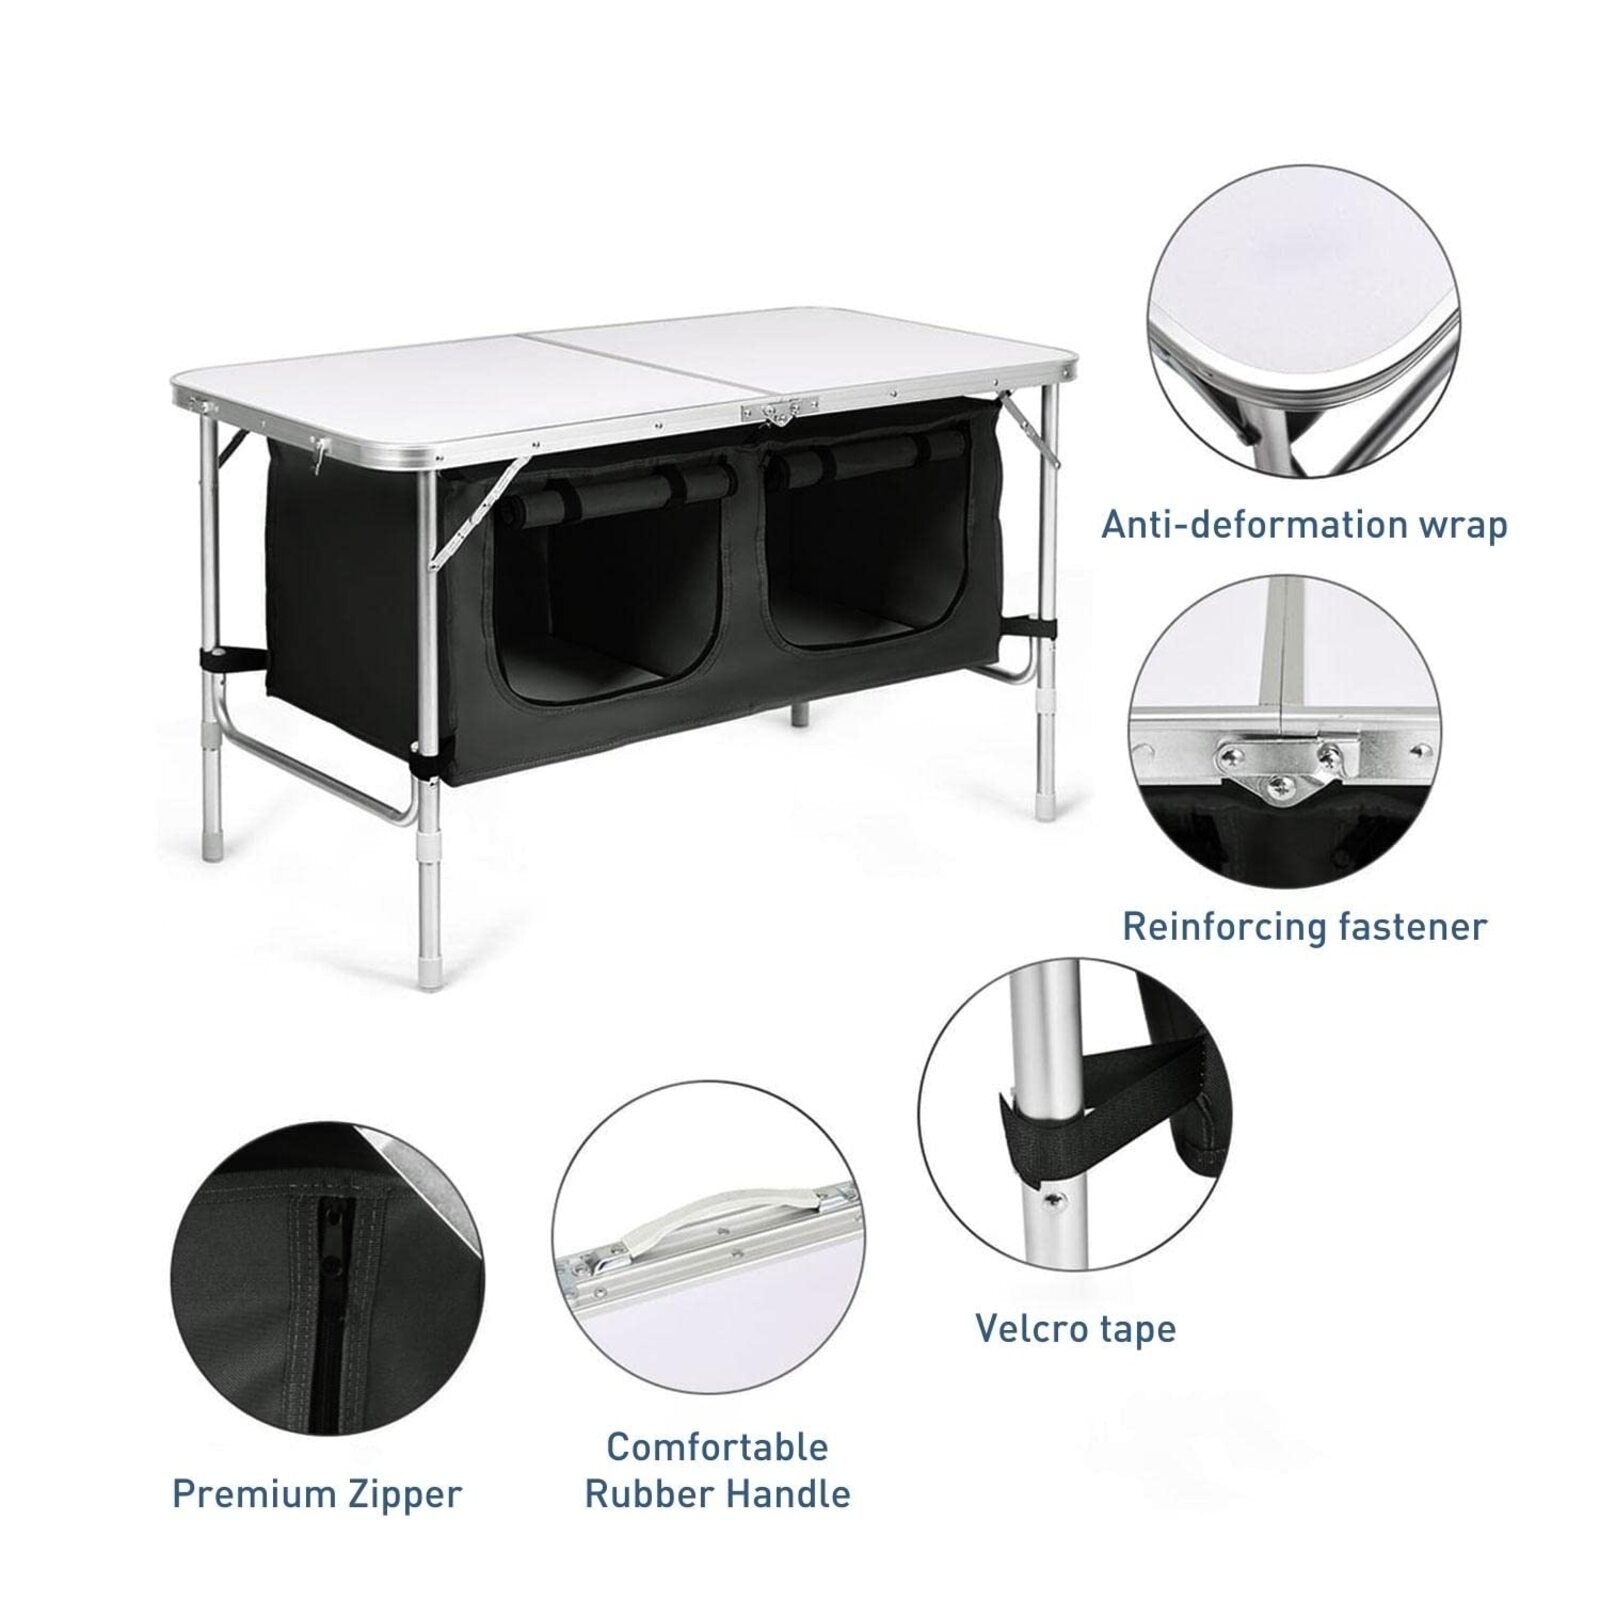 KILIROO Camping Table 120cm Silver (With Black Storage Bag)